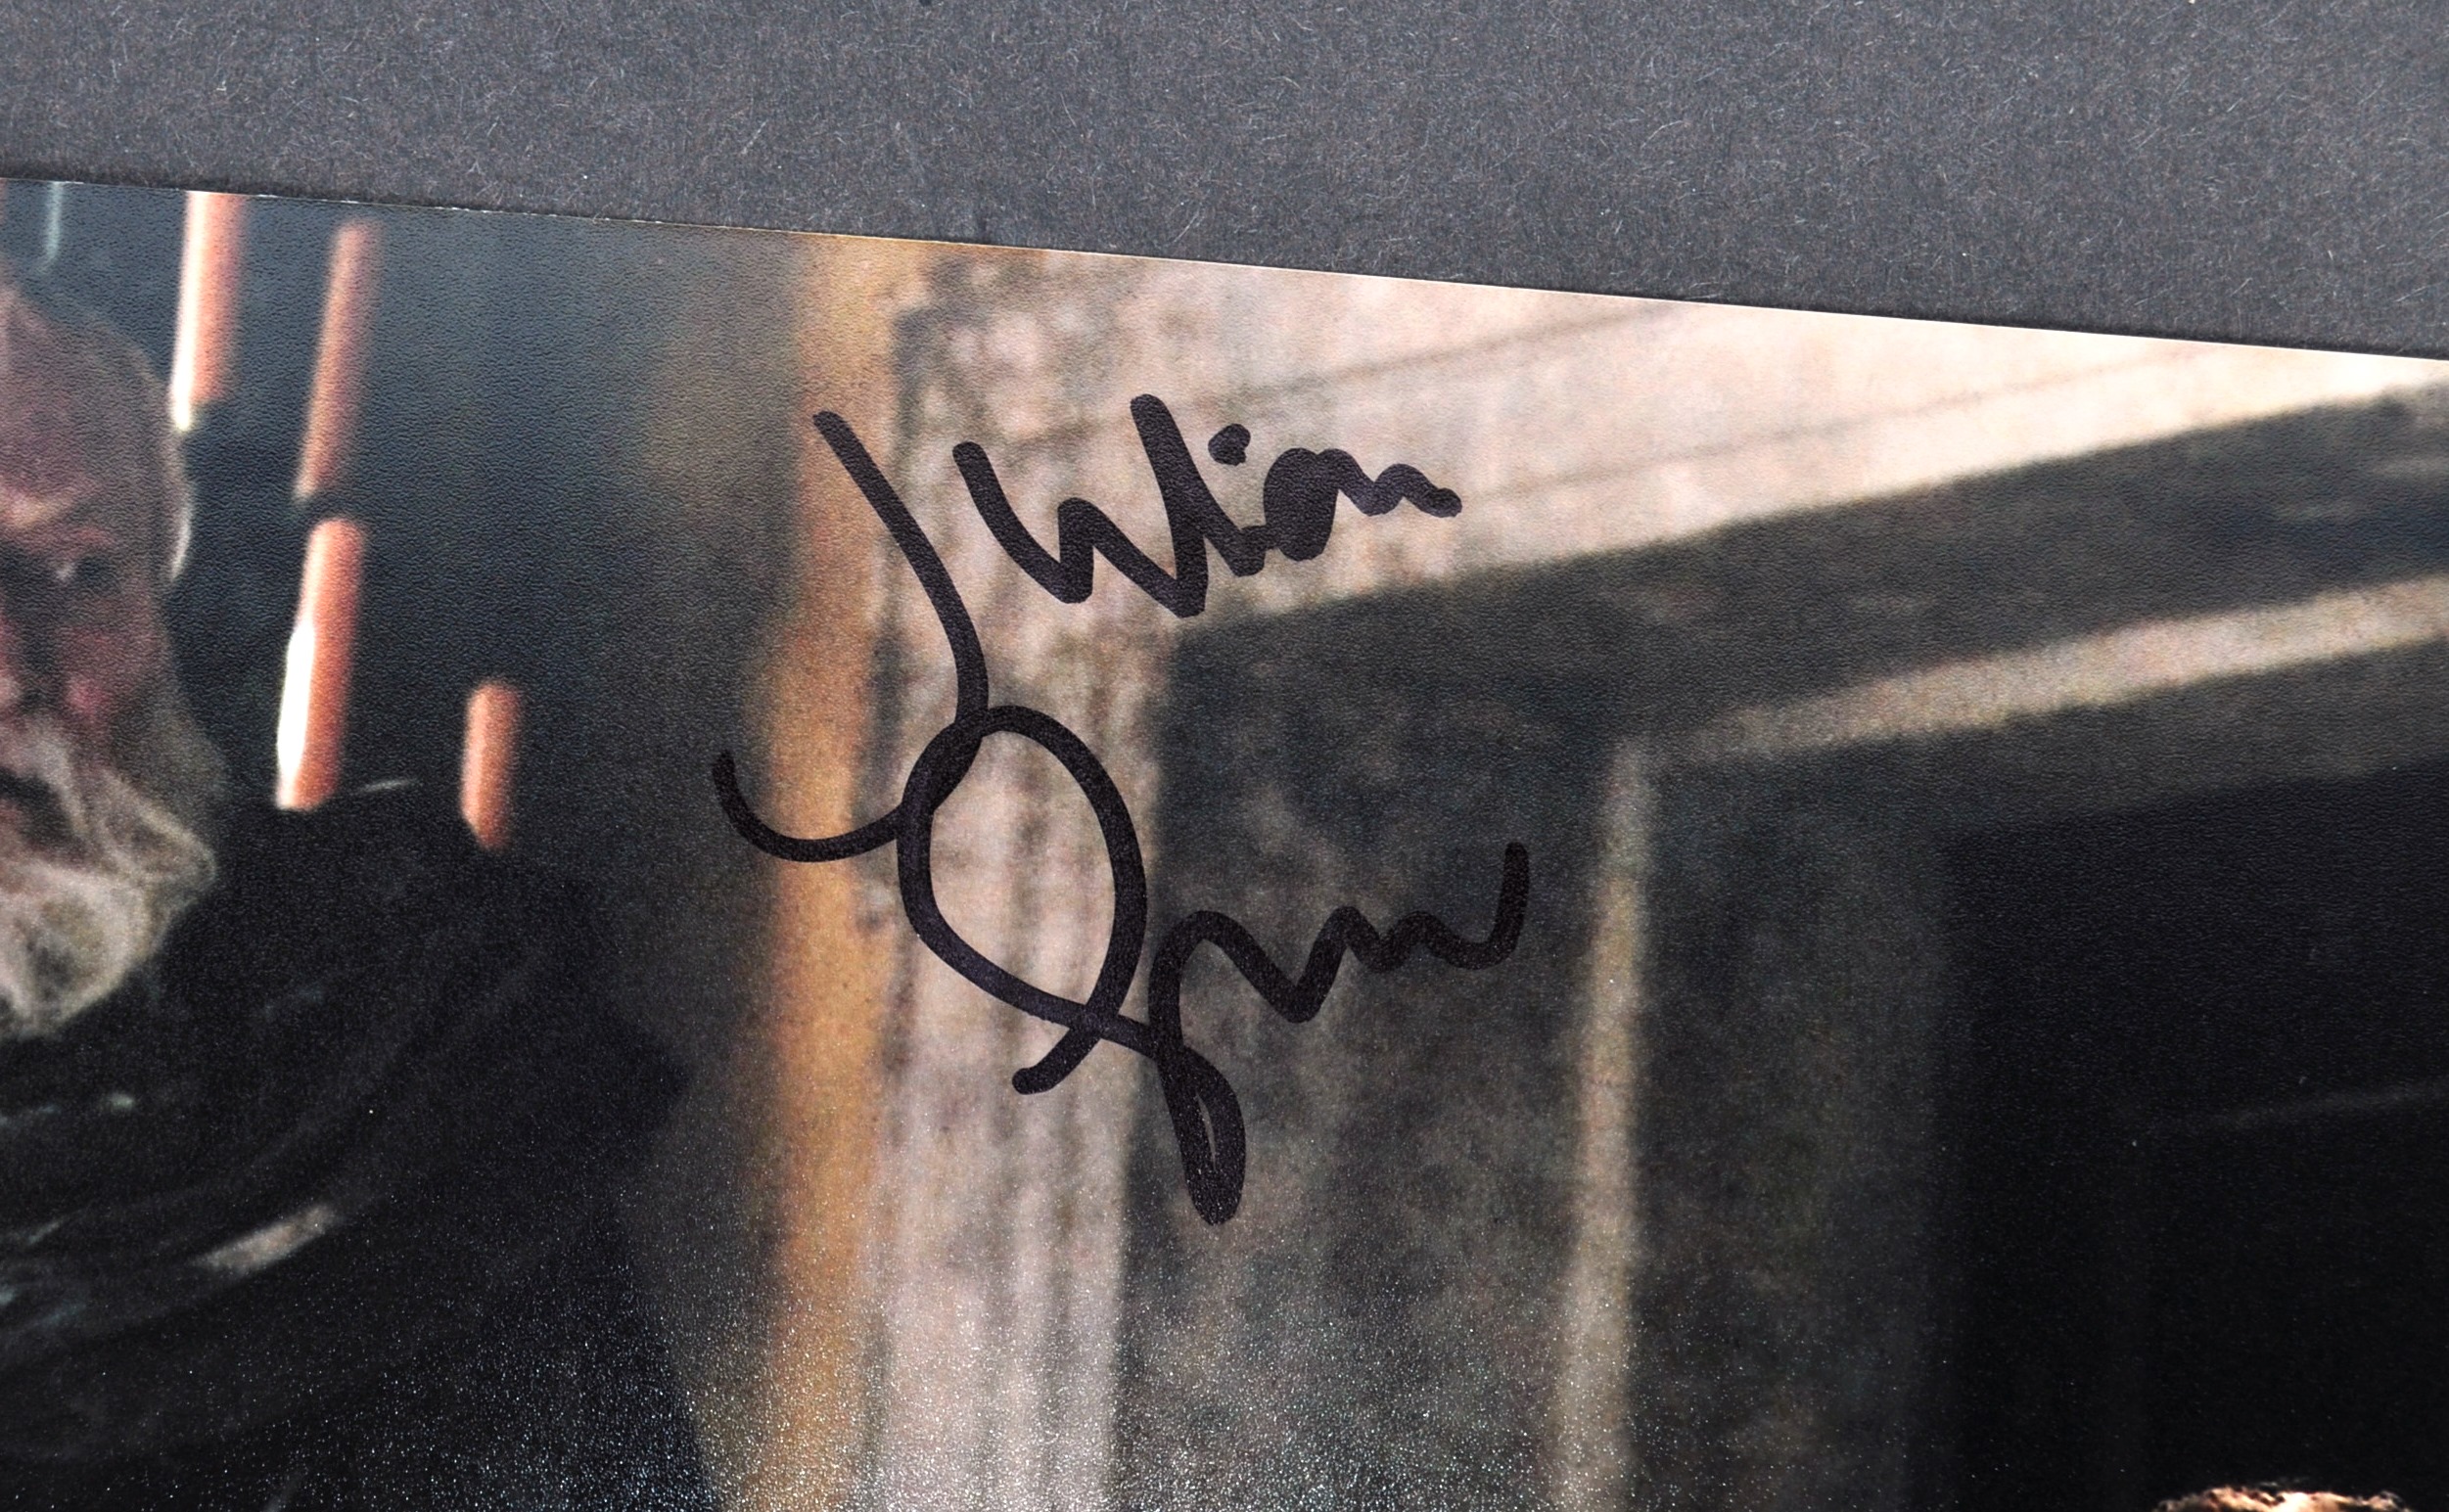 GAME OF THRONES JULIAN GLOVER AUTOGRAPHED PHOTOGRA - Image 2 of 2